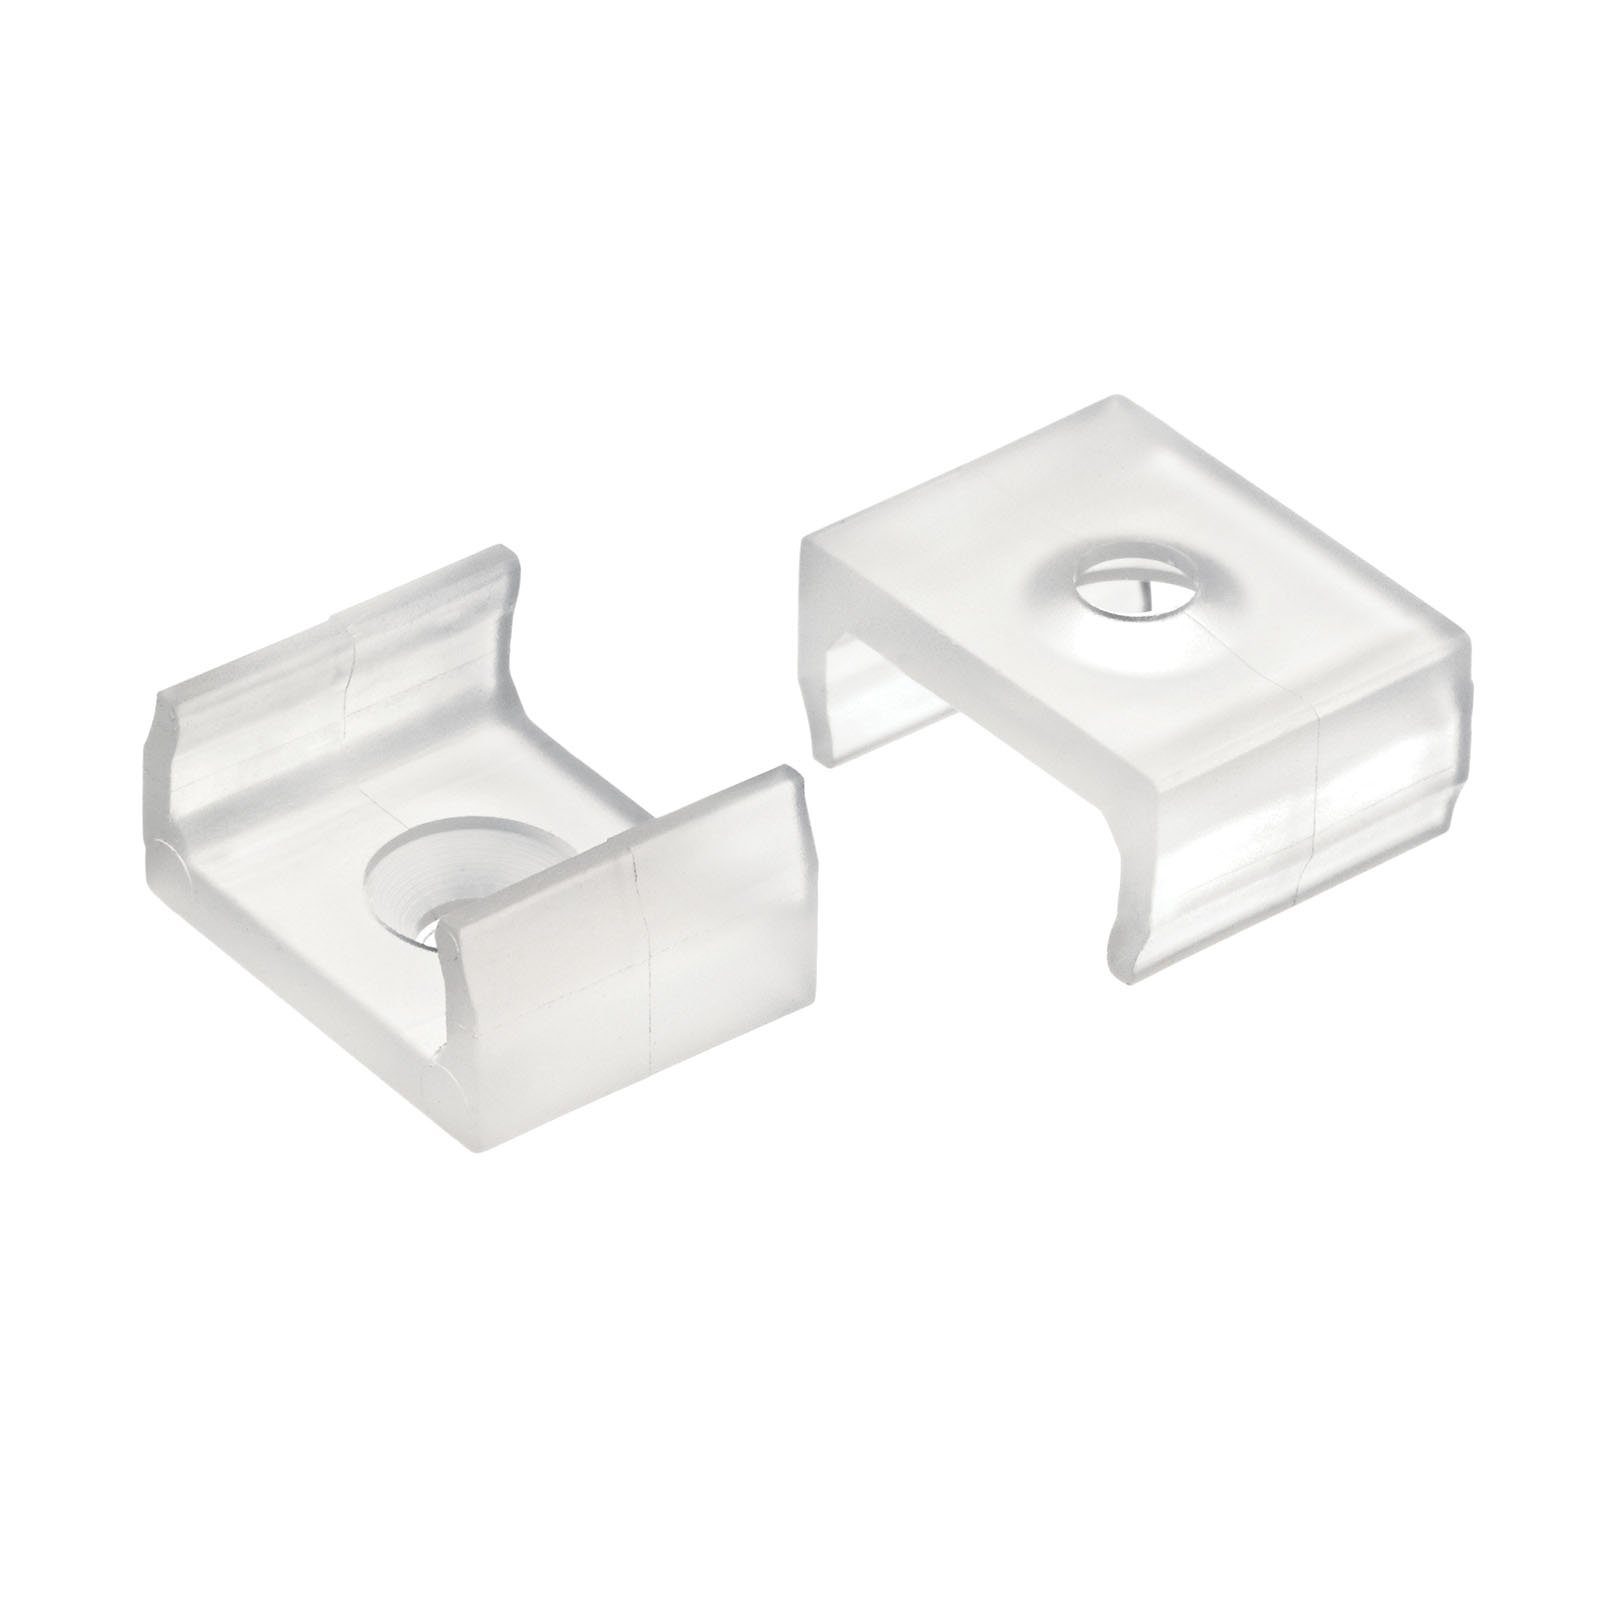 These clear plastic mounting clips allow the TE Standard Series - Standard Depth Surface Channel to easily snap into place. Audible click works to reaffirm that your installation is securely set.10 per bag